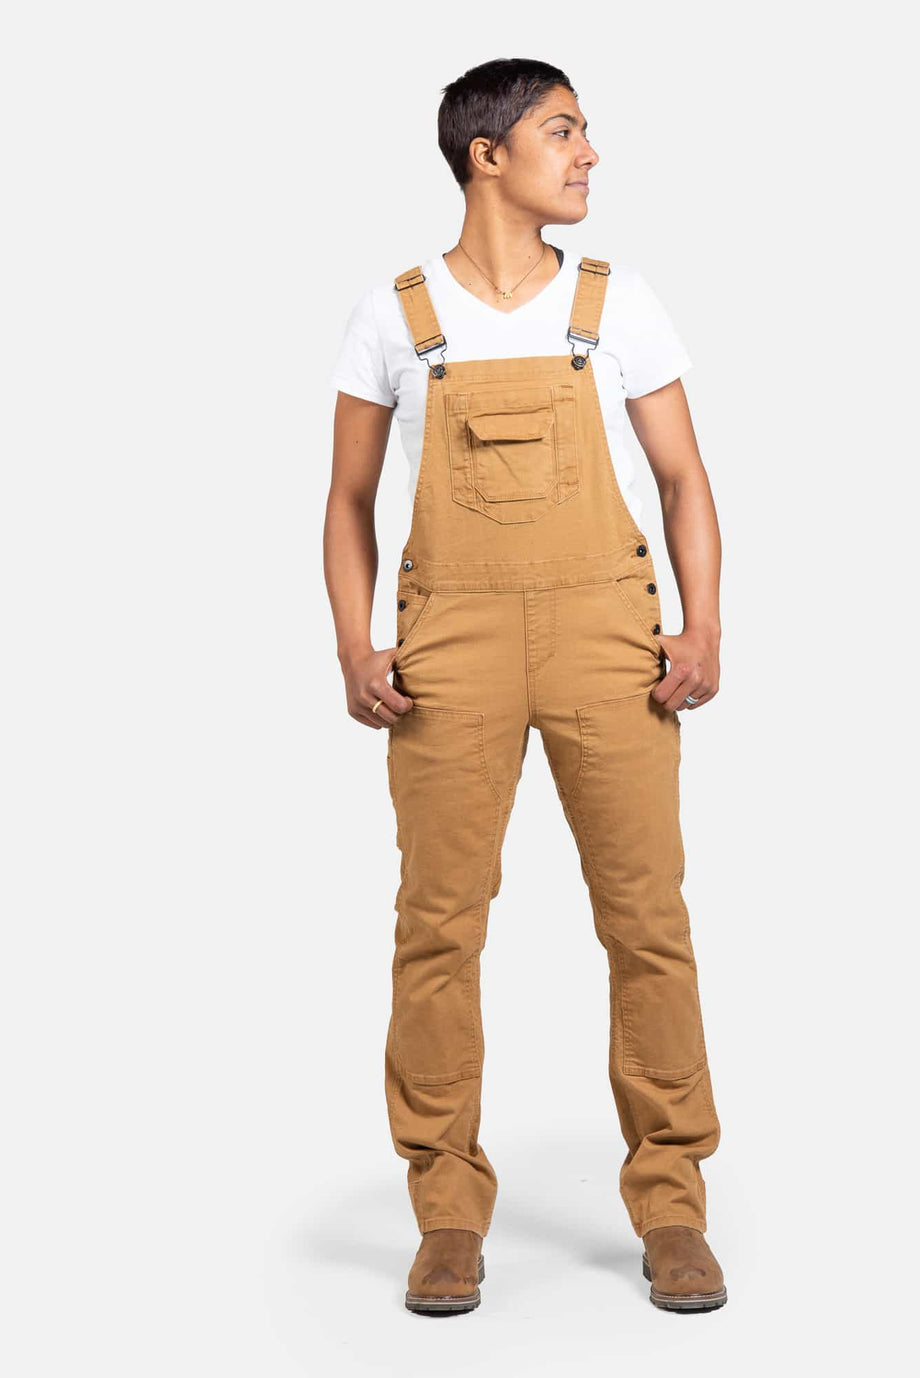 Freshley Overalls For Women in Saddle Brown Canvas | Dovetail Workwear